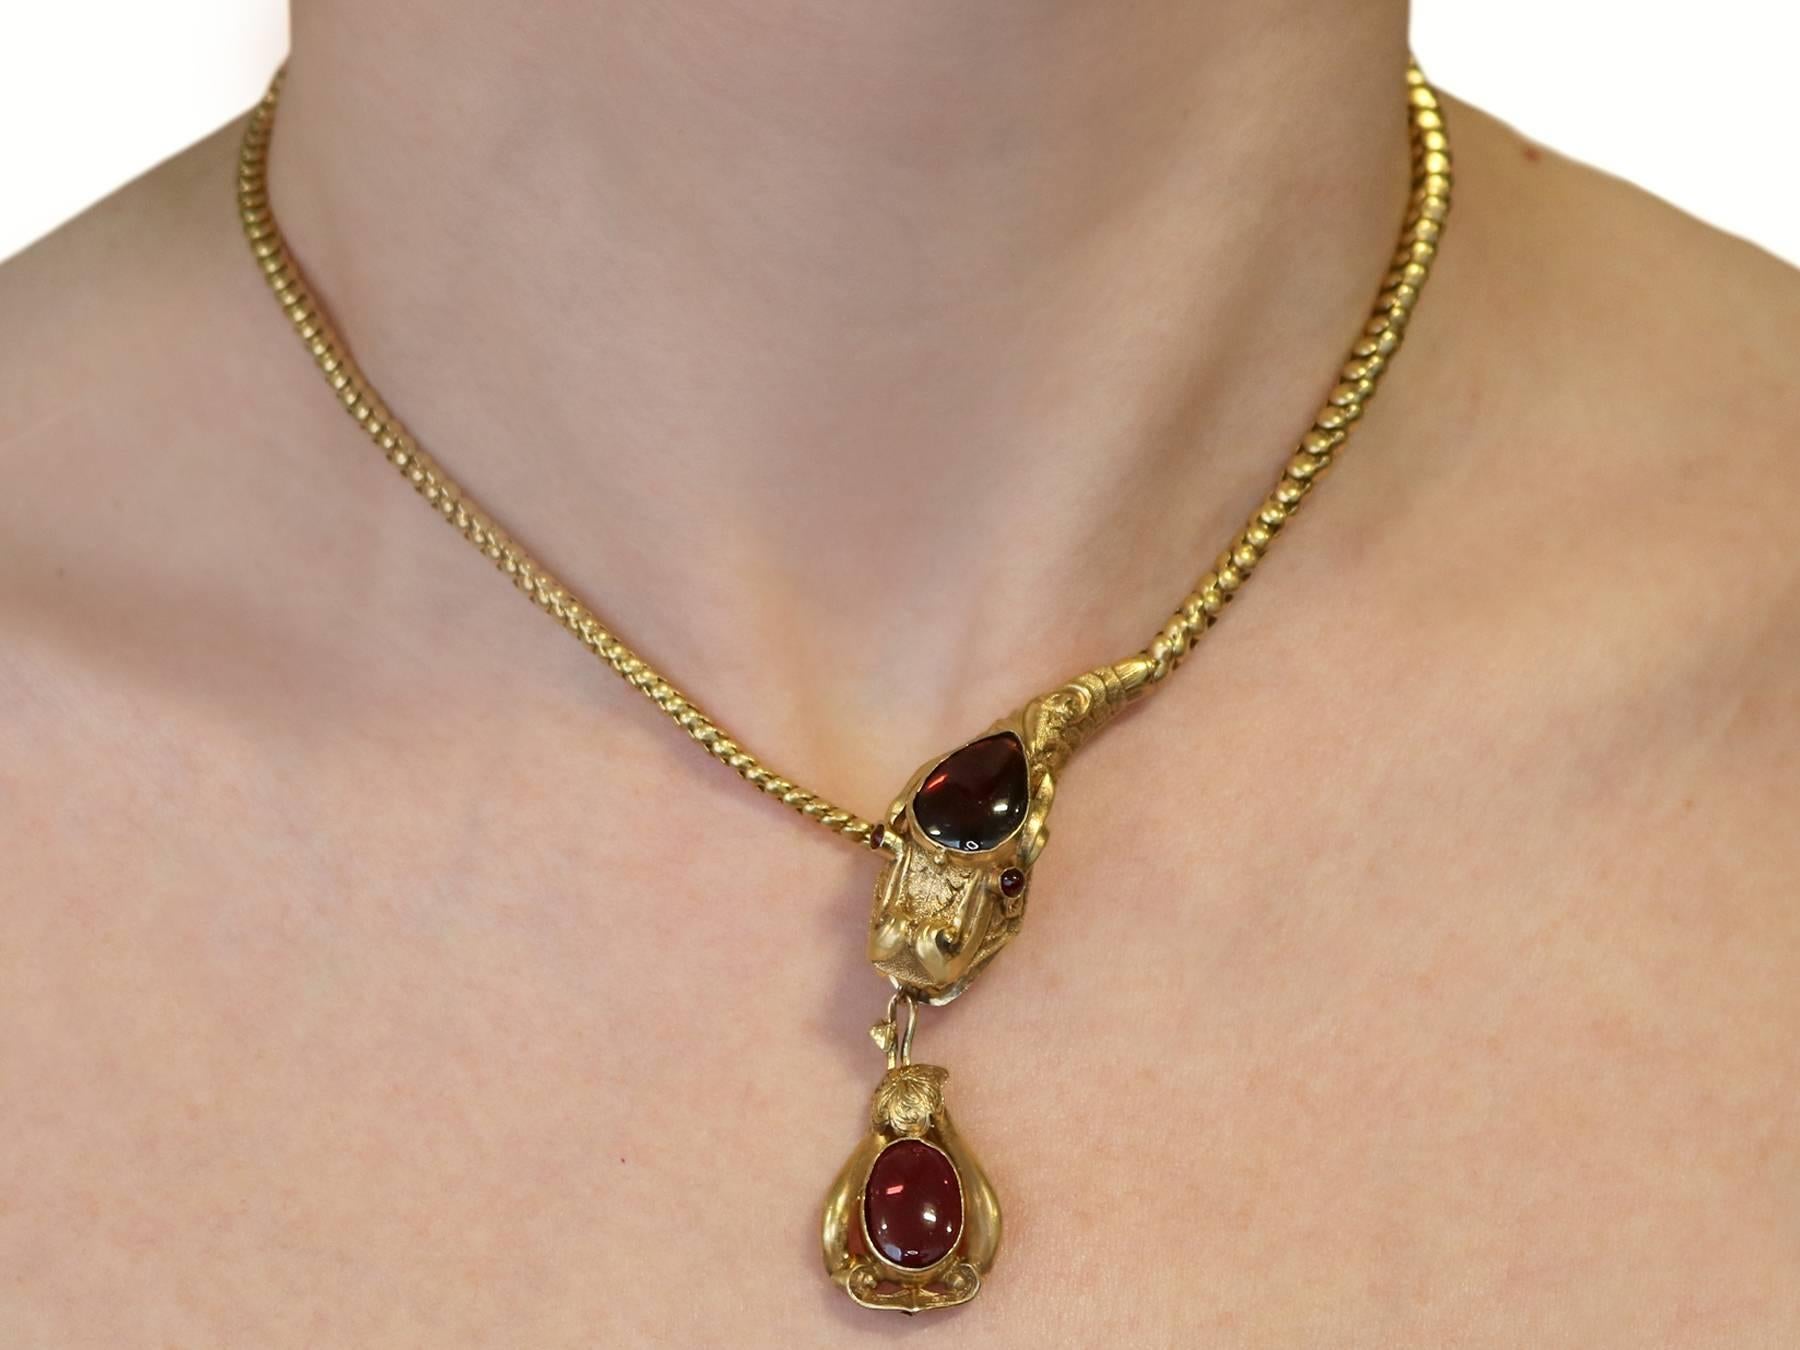 1860s Antique 3.92 Carat Garnet and Yellow Gold Dragon Necklace 2